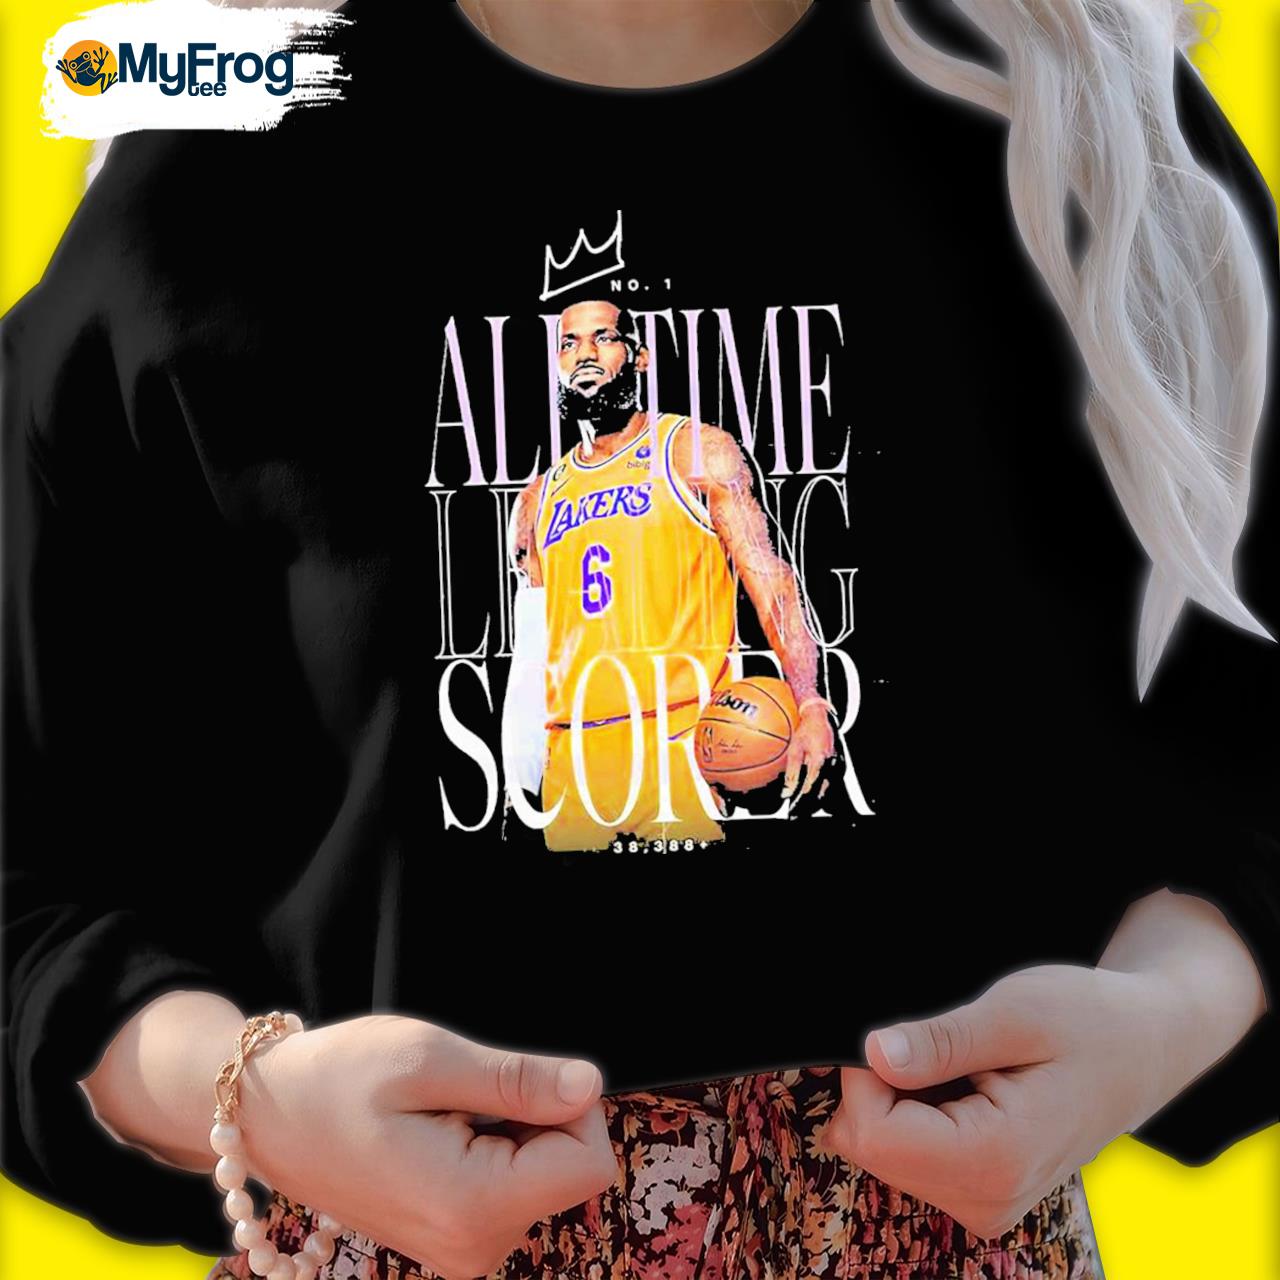 Lebron James Lakers Leading Scorer T-shirt,Sweater, Hoodie, And